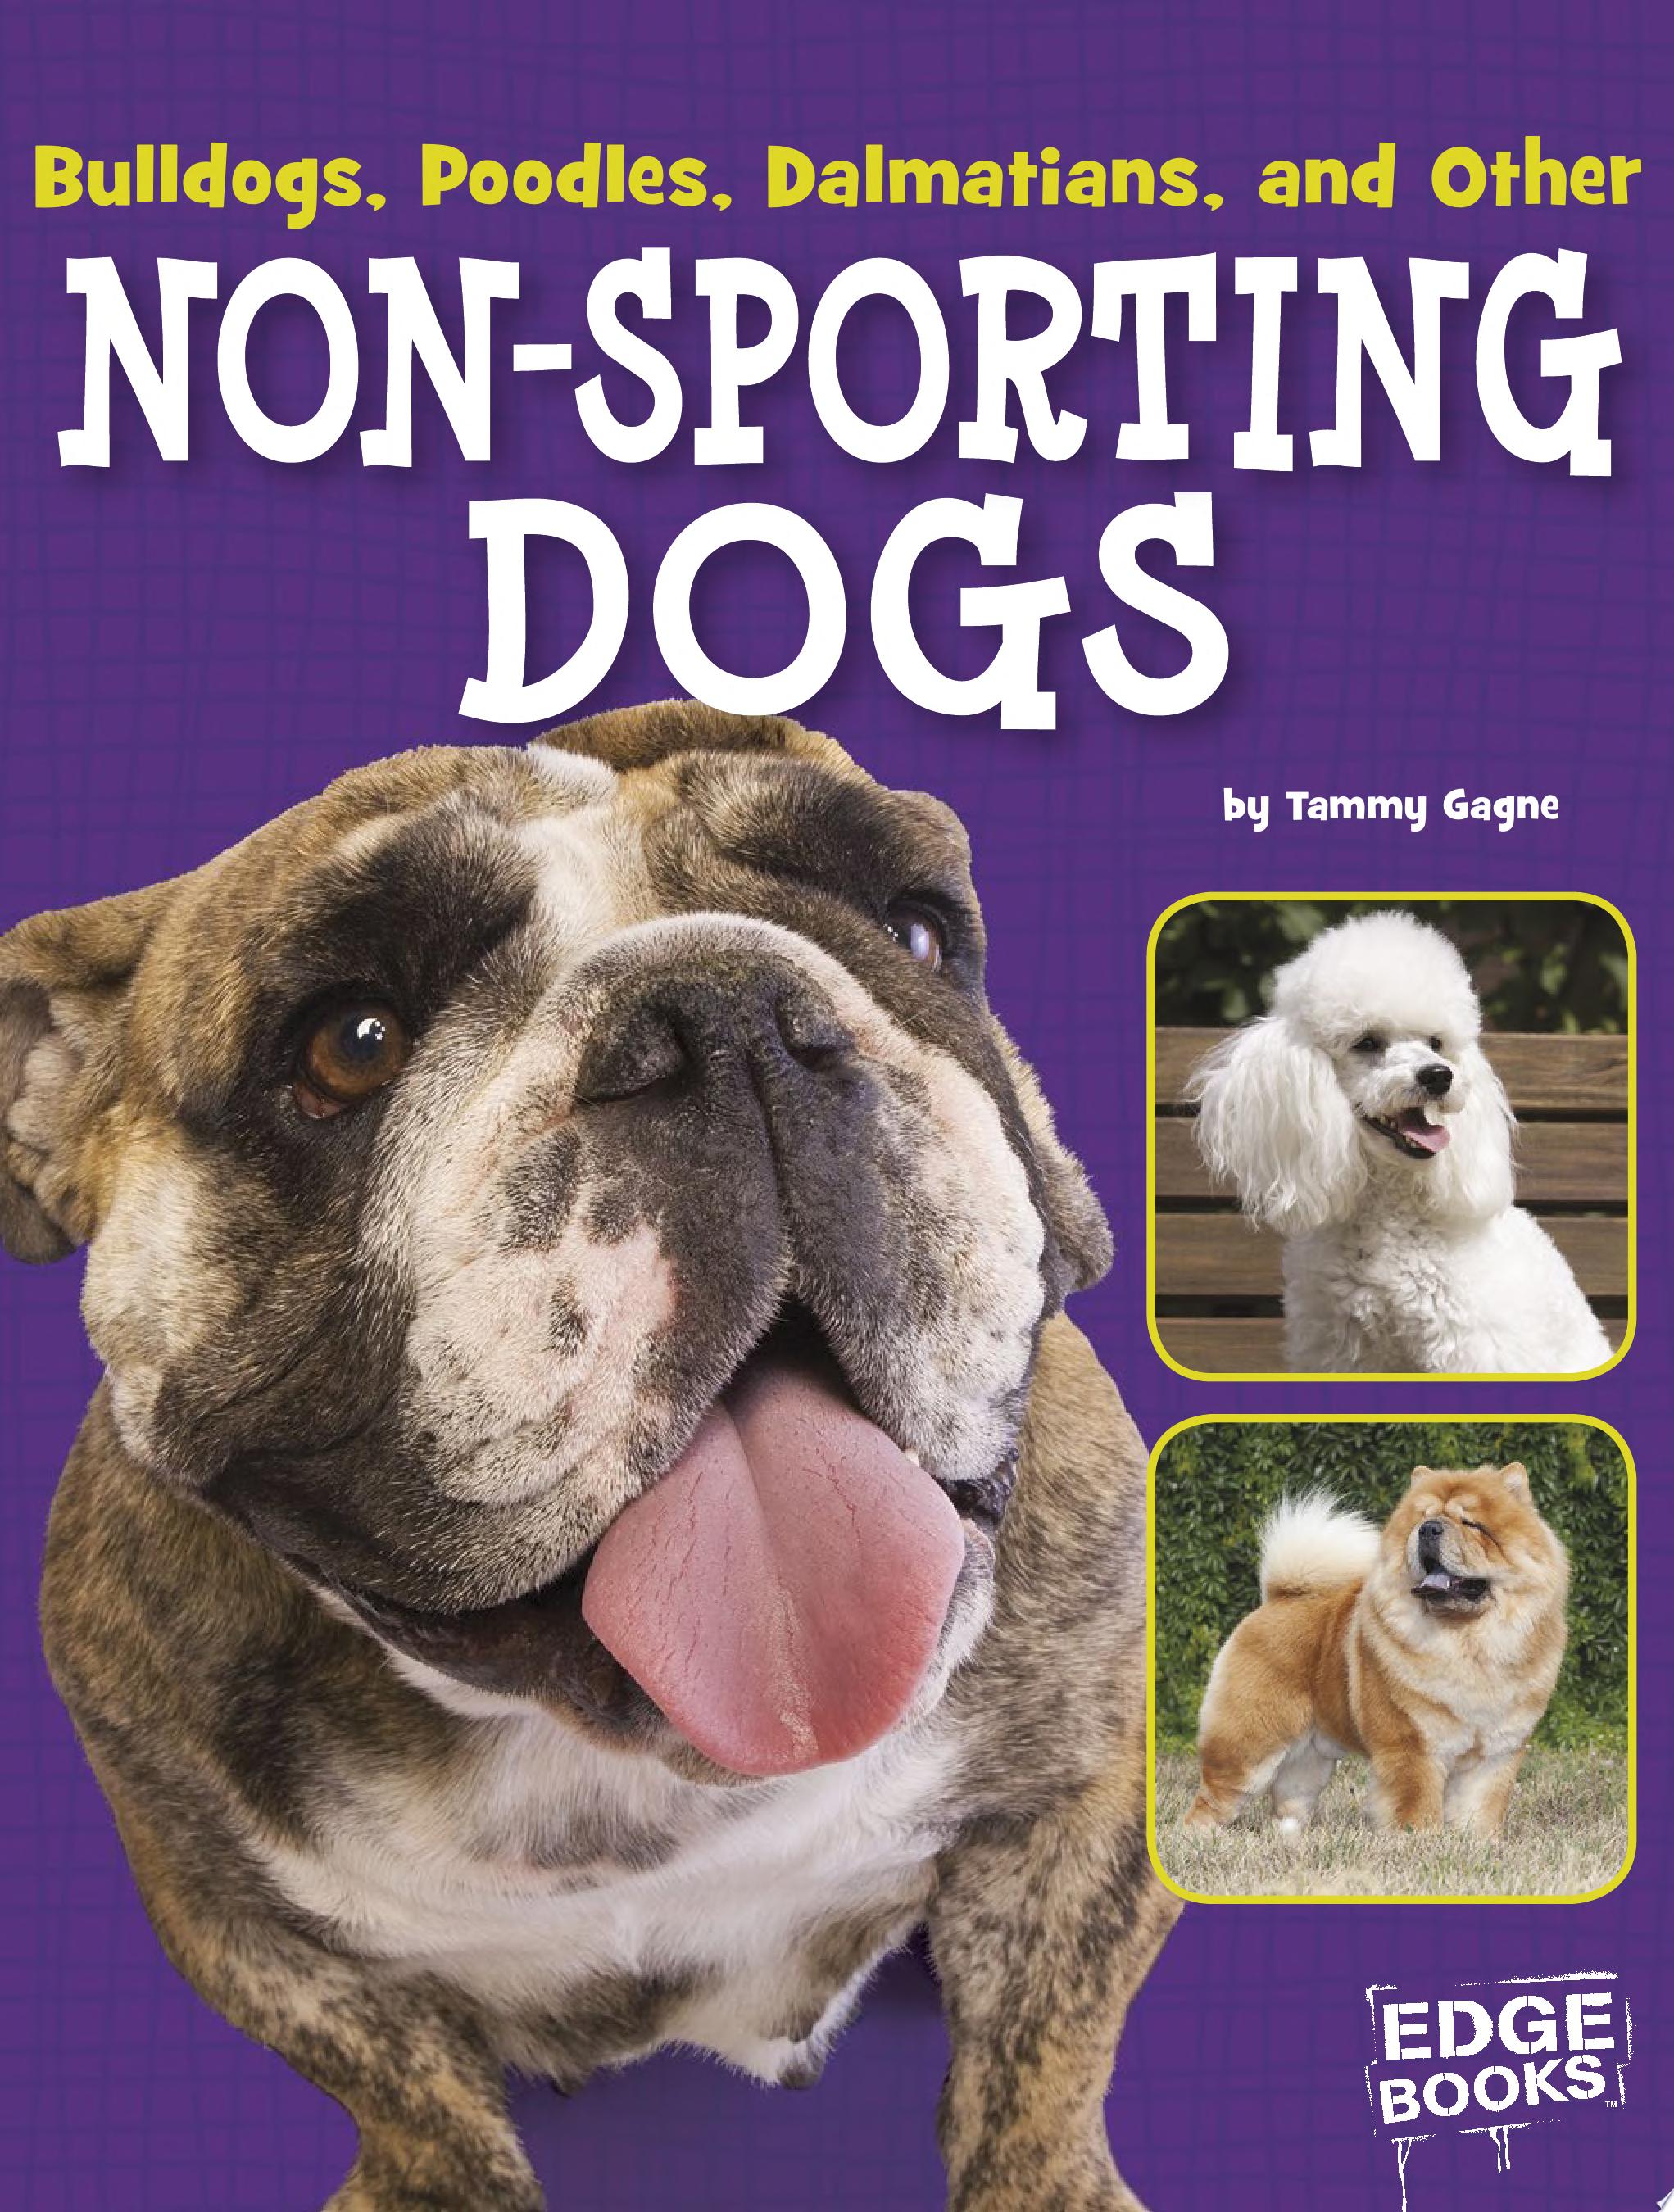 Image for "Bulldogs, Poodles, Dalmatians, and Other Non-Sporting Dogs"